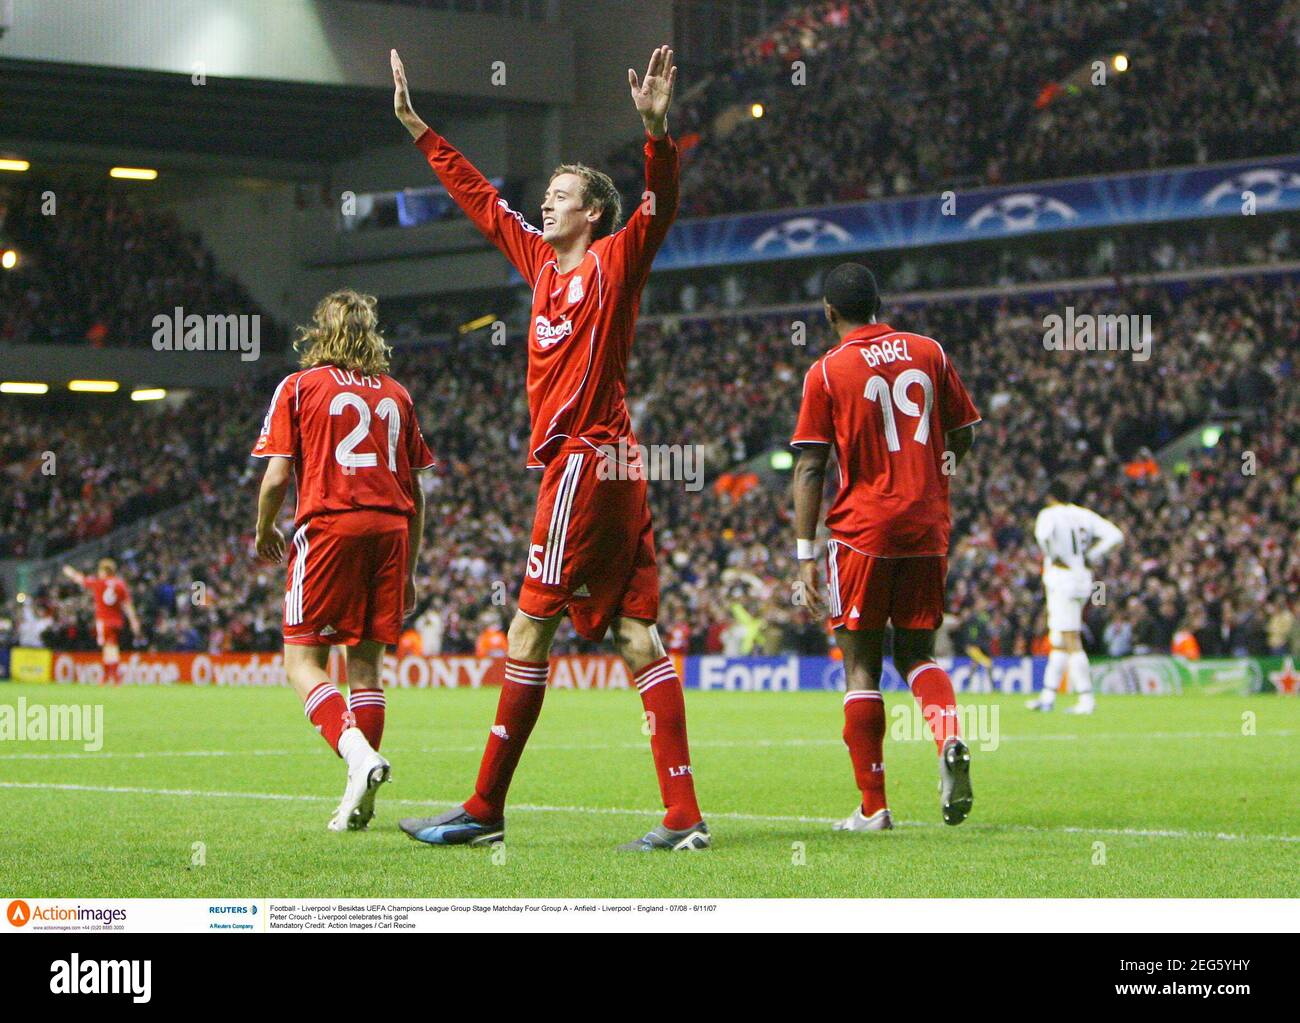 Football - Liverpool v Besiktas UEFA Champions League Group Stage Matchday  Four Group A - Anfield - Liverpool - England - 07/08 - 6/11/07 Peter Crouch  - Liverpool celebrates his goal Mandatory Credit: Action Images / Carl  Recine Stock Photo - Alamy